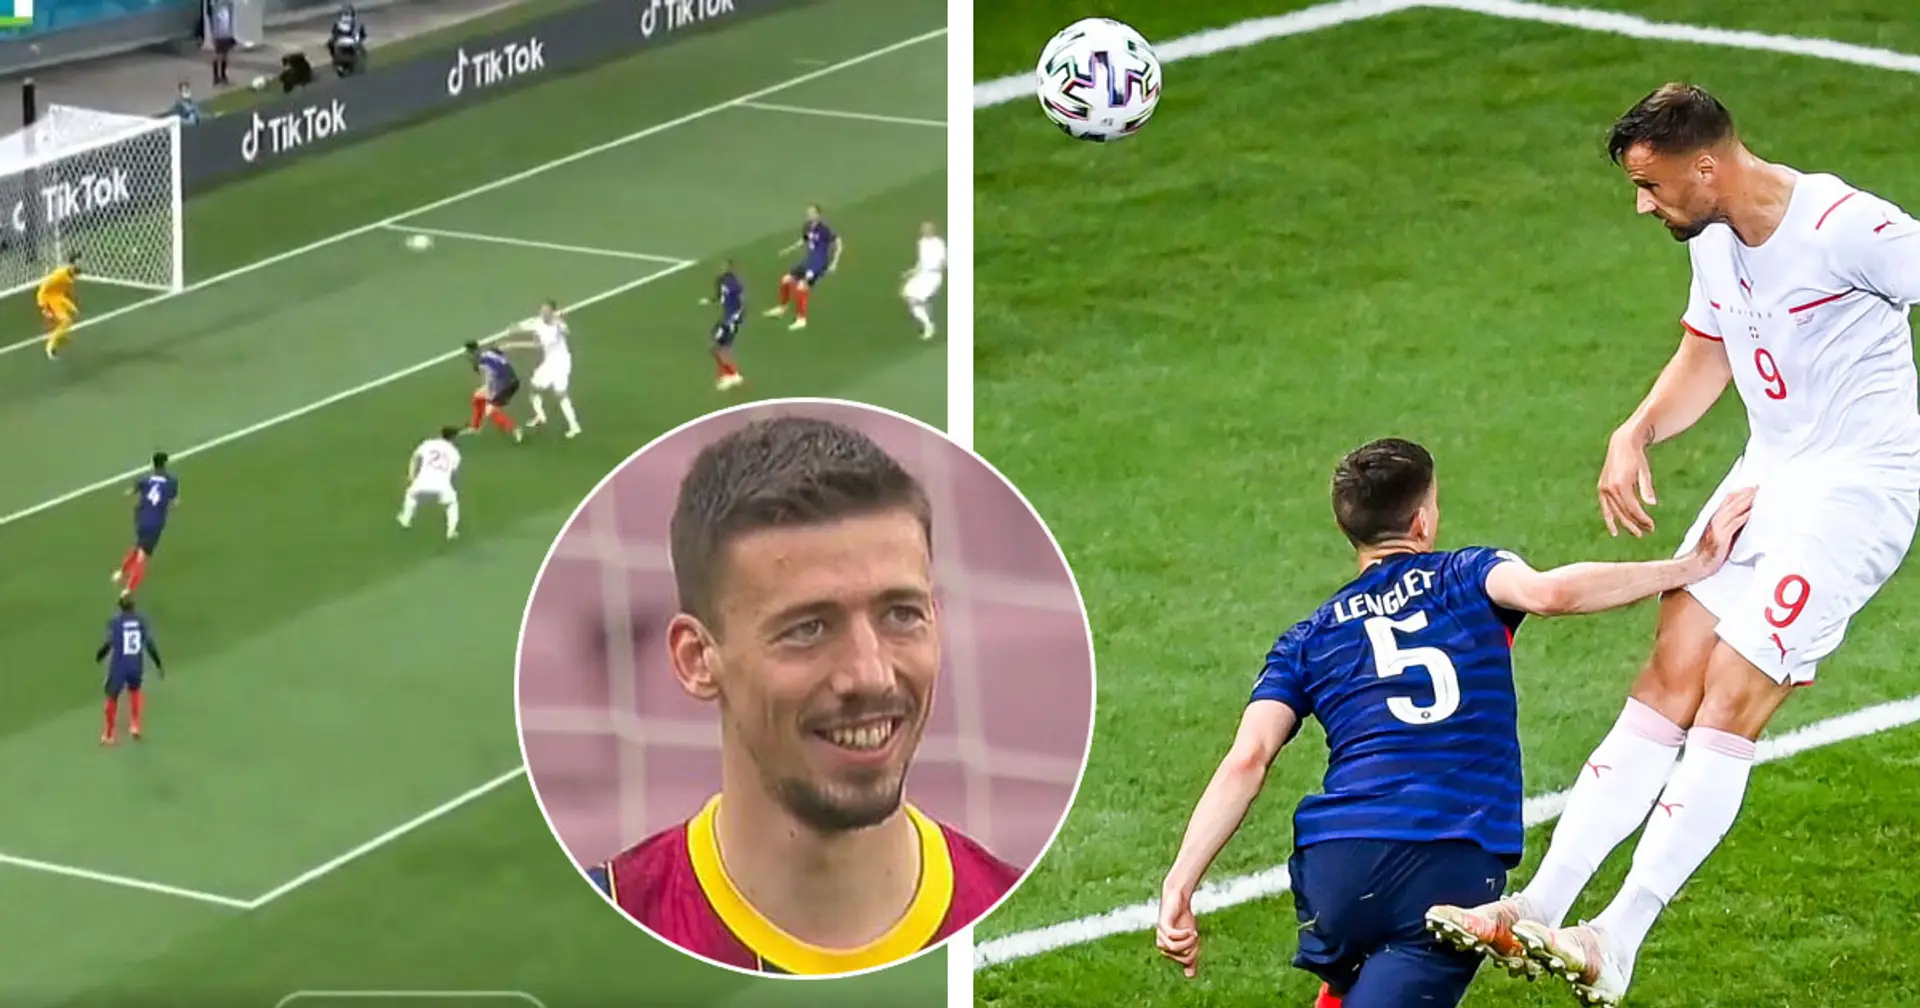 New day, same old Lenglet: Barca defender easily beaten as France concede first vs Switzerland